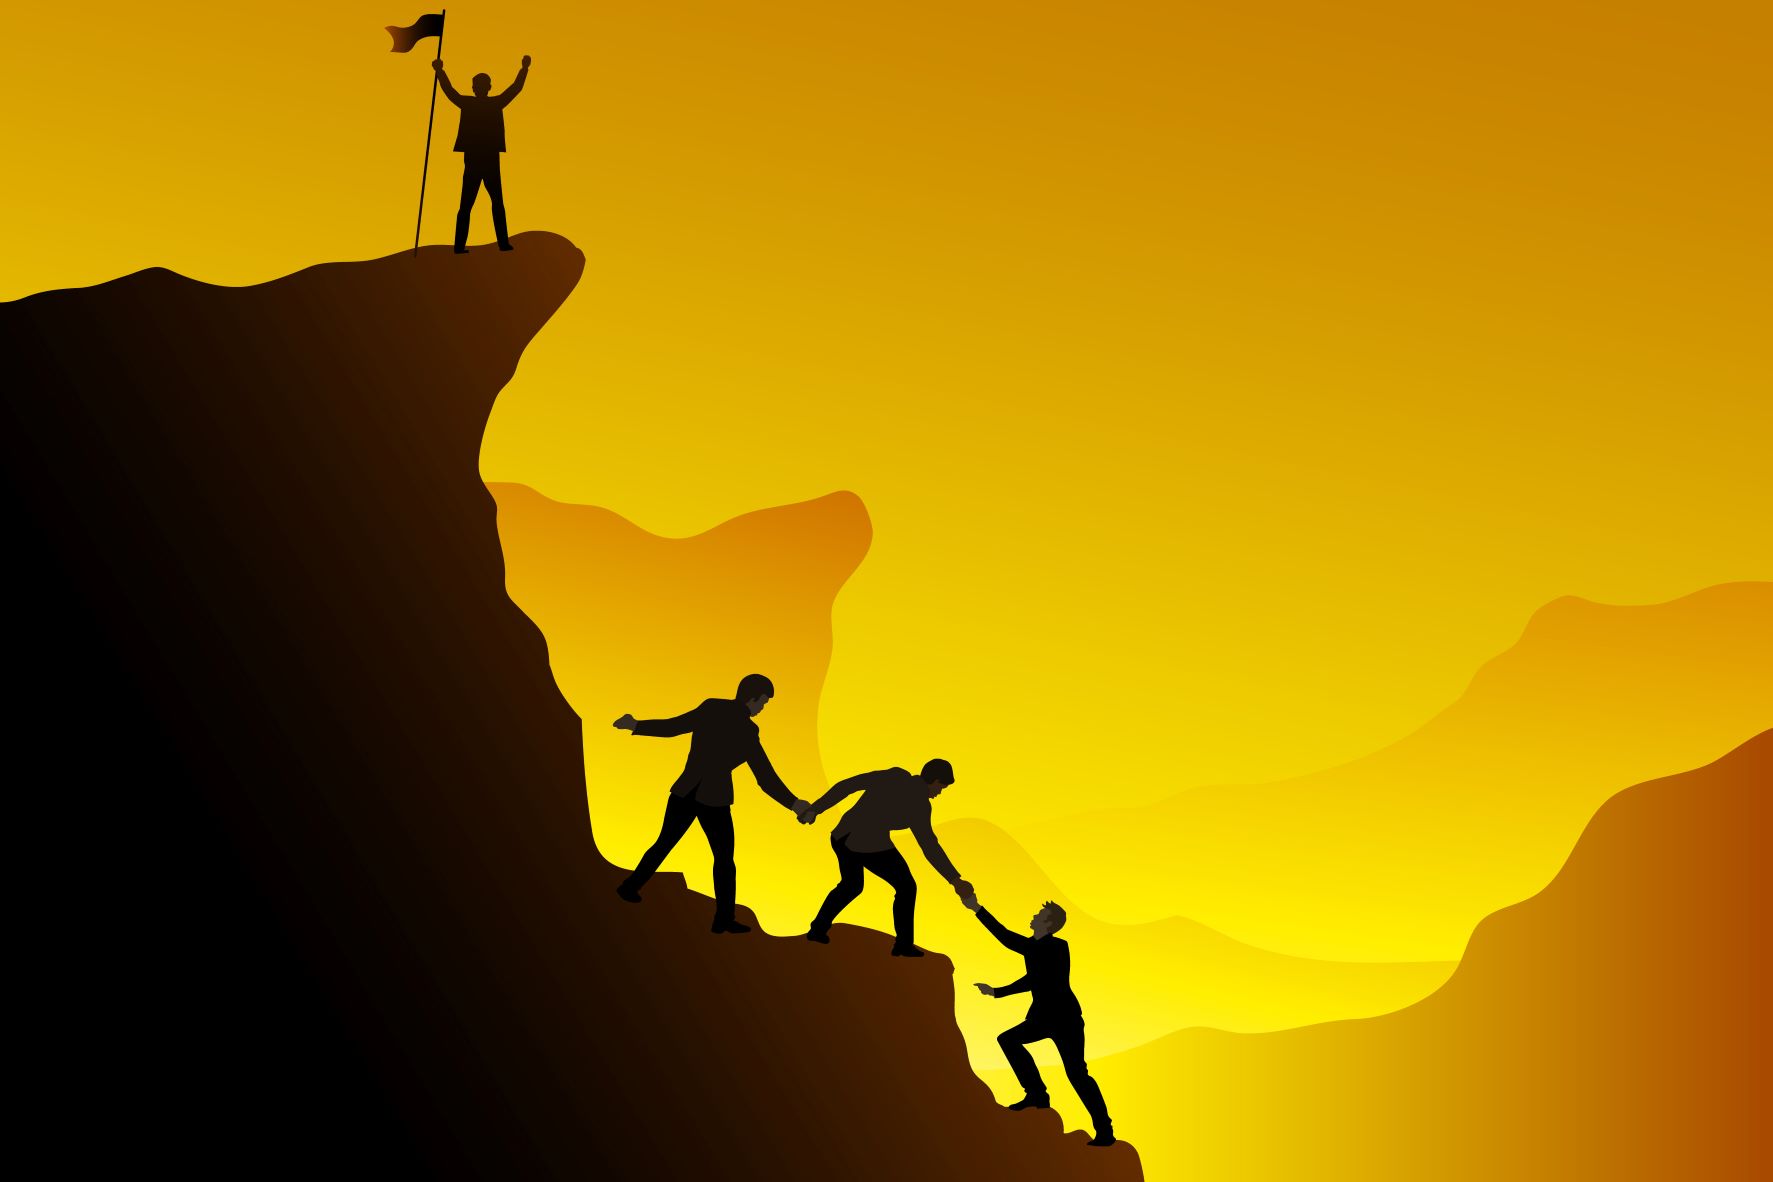 group of people climbing a mountain cartoon, silhouettes on yellow